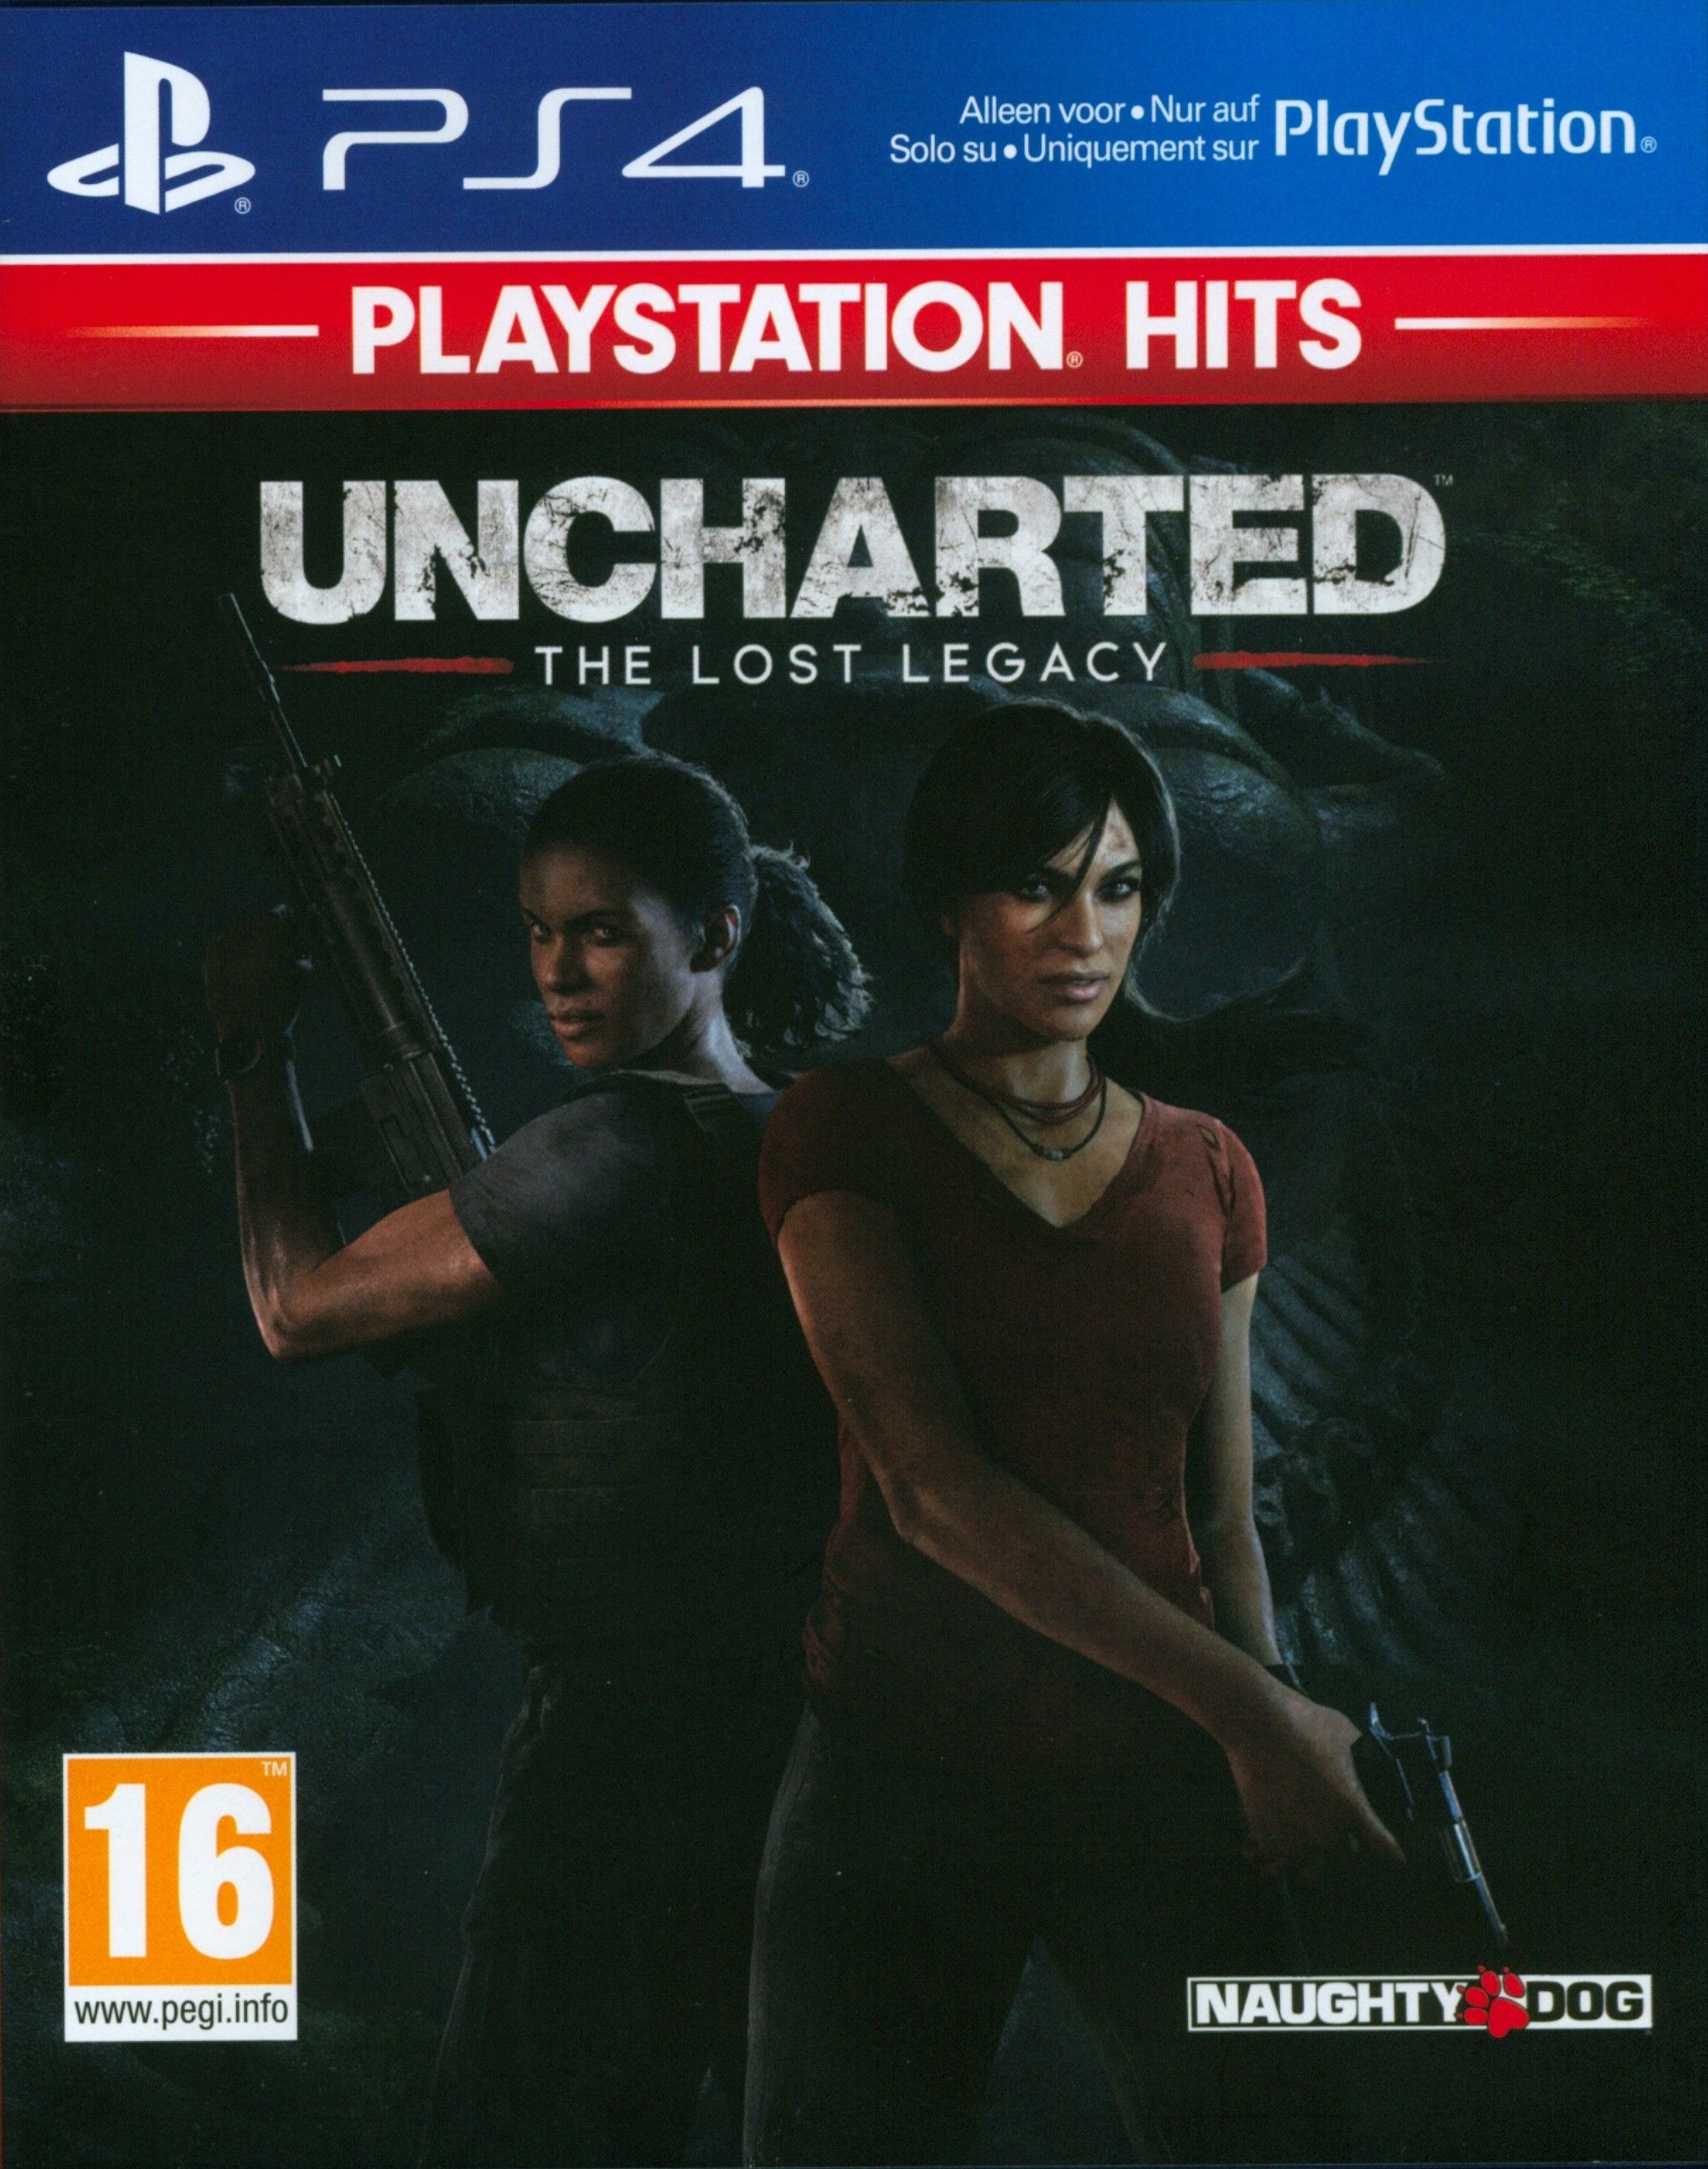 Uncharted Lost Legacy - Playstation Hits